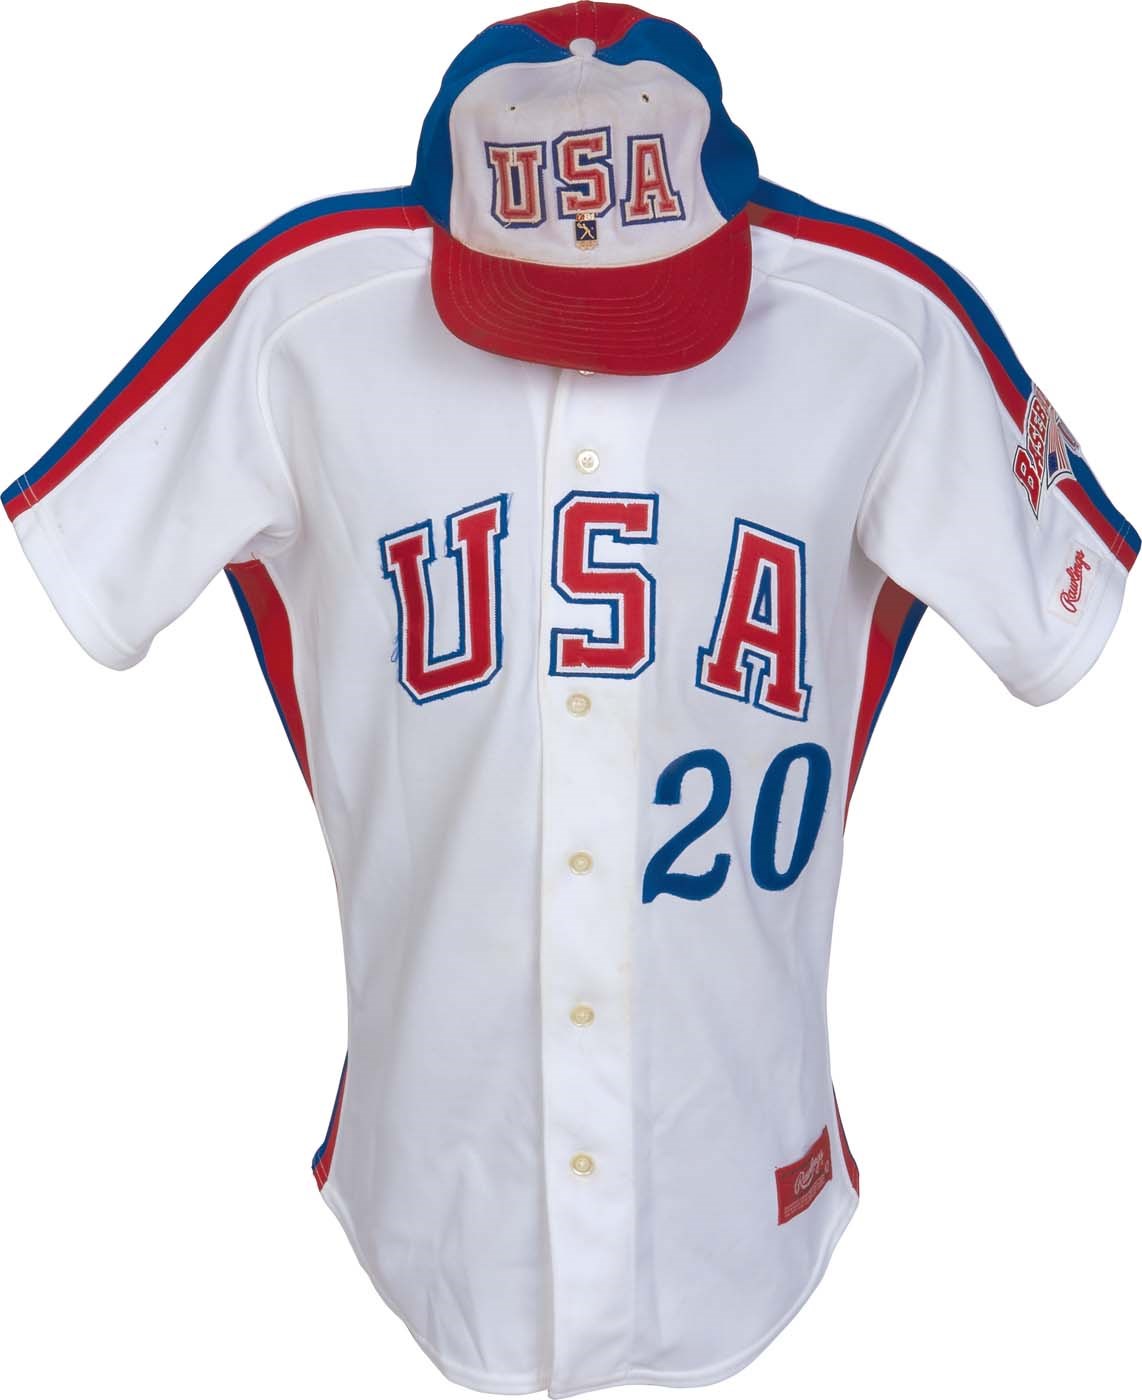 - 1984 Olympics John Marzano USA Game Worn Home-Run Uniform - First USA HR of the '84 Games (Photo-Matched)